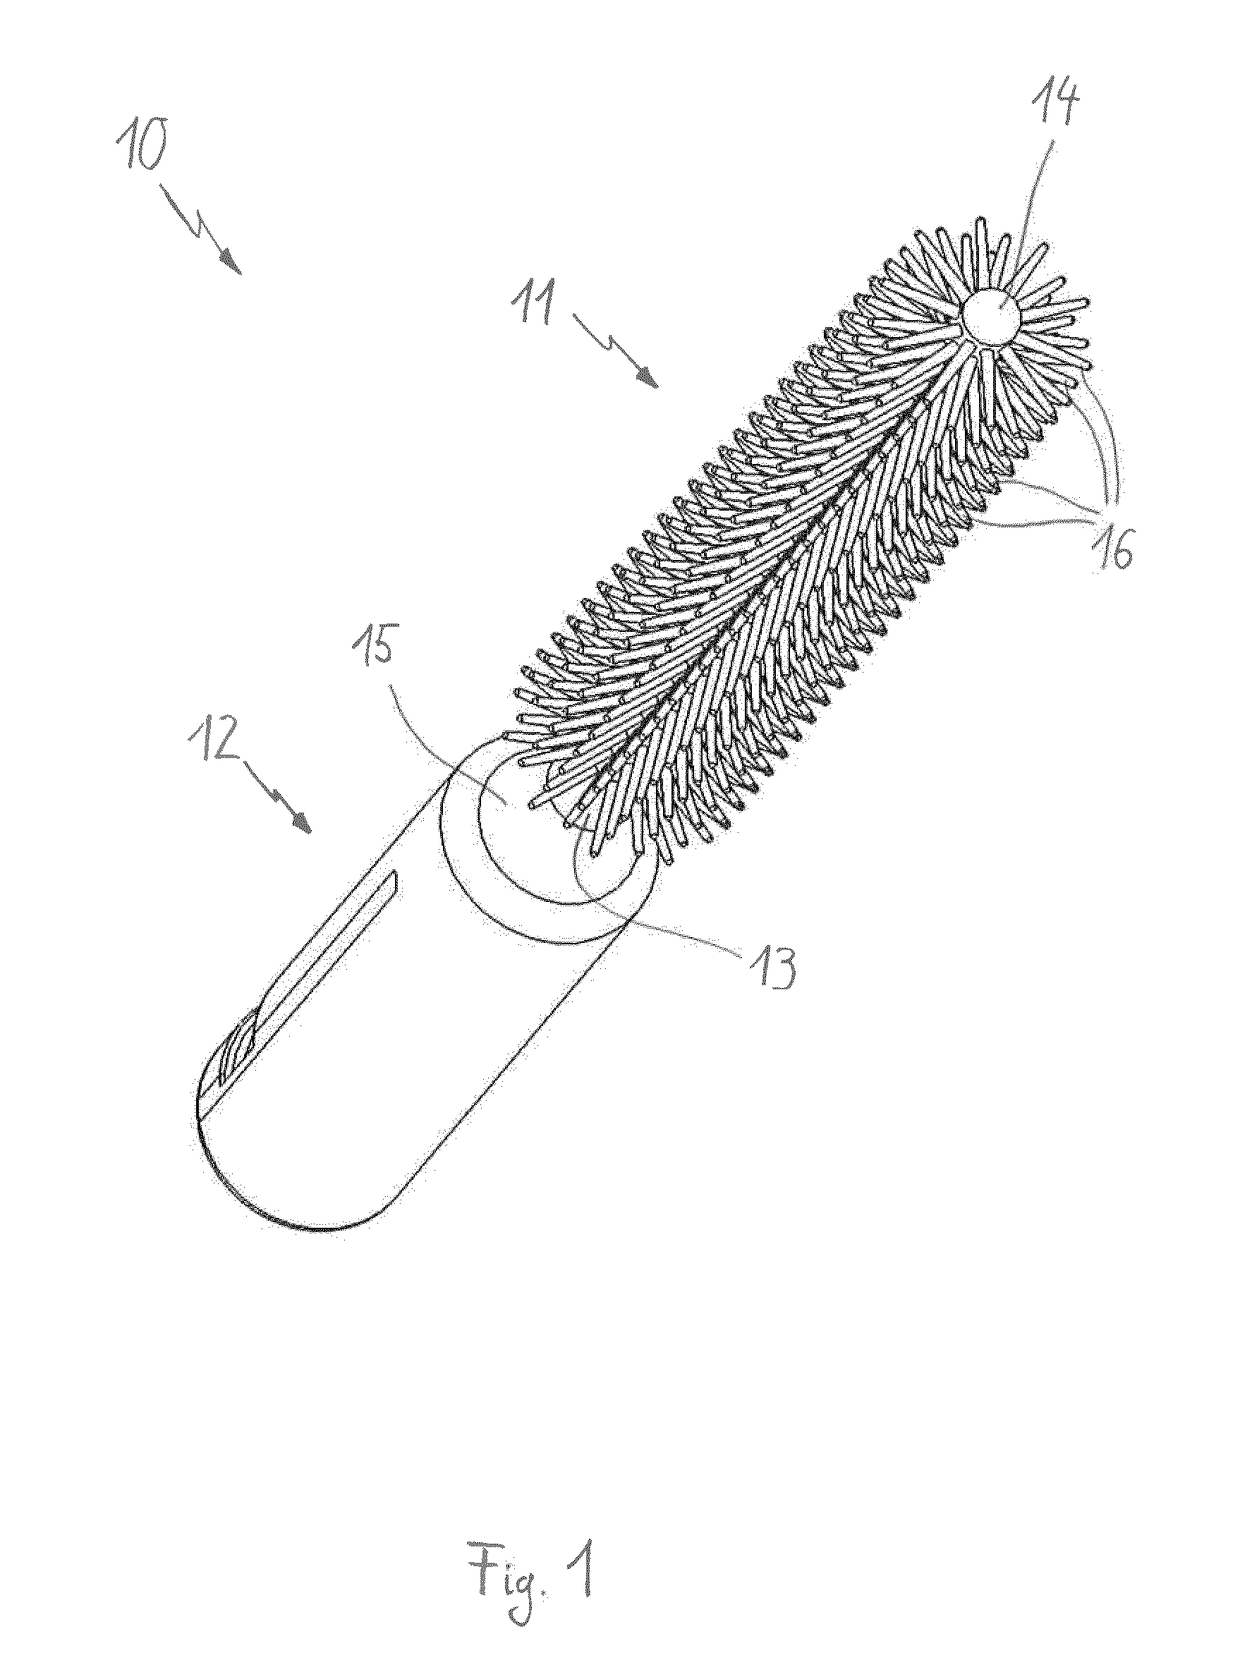 Interdental brush for cleaning interdental spaces and/or dental implants